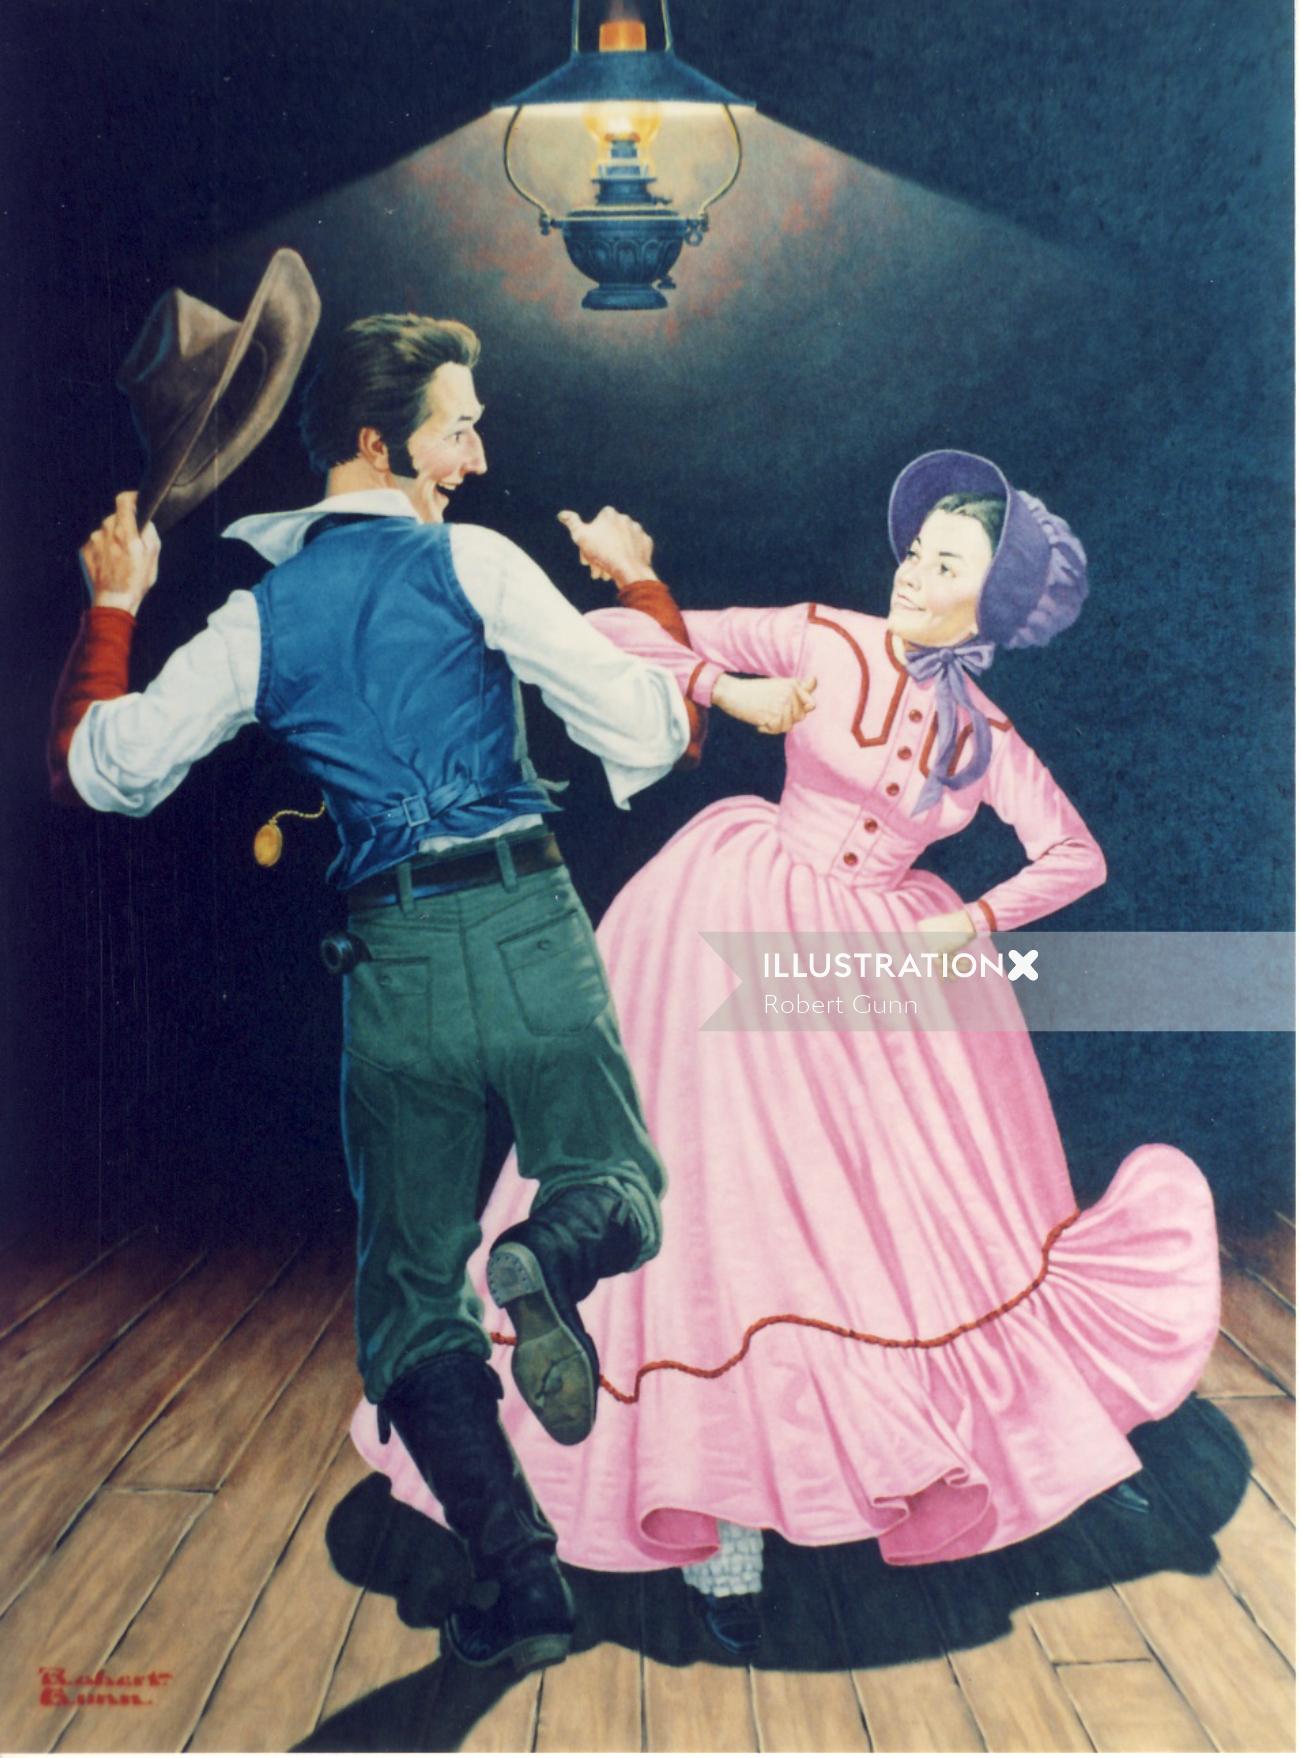 Ilustration of couple dancing at country hoedown